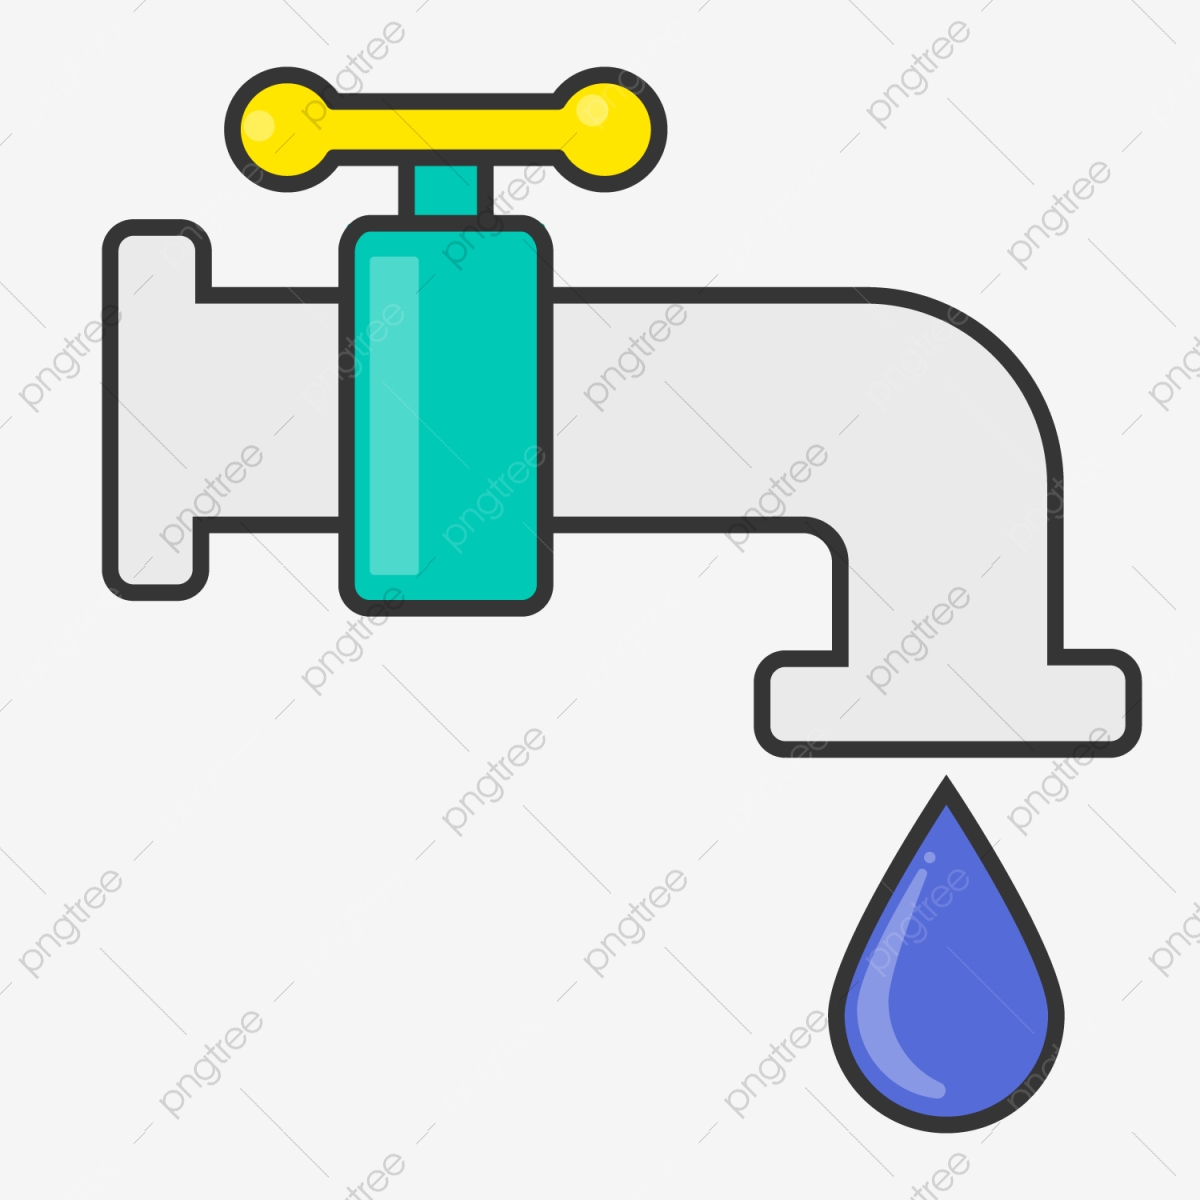 faucet clipart water resource